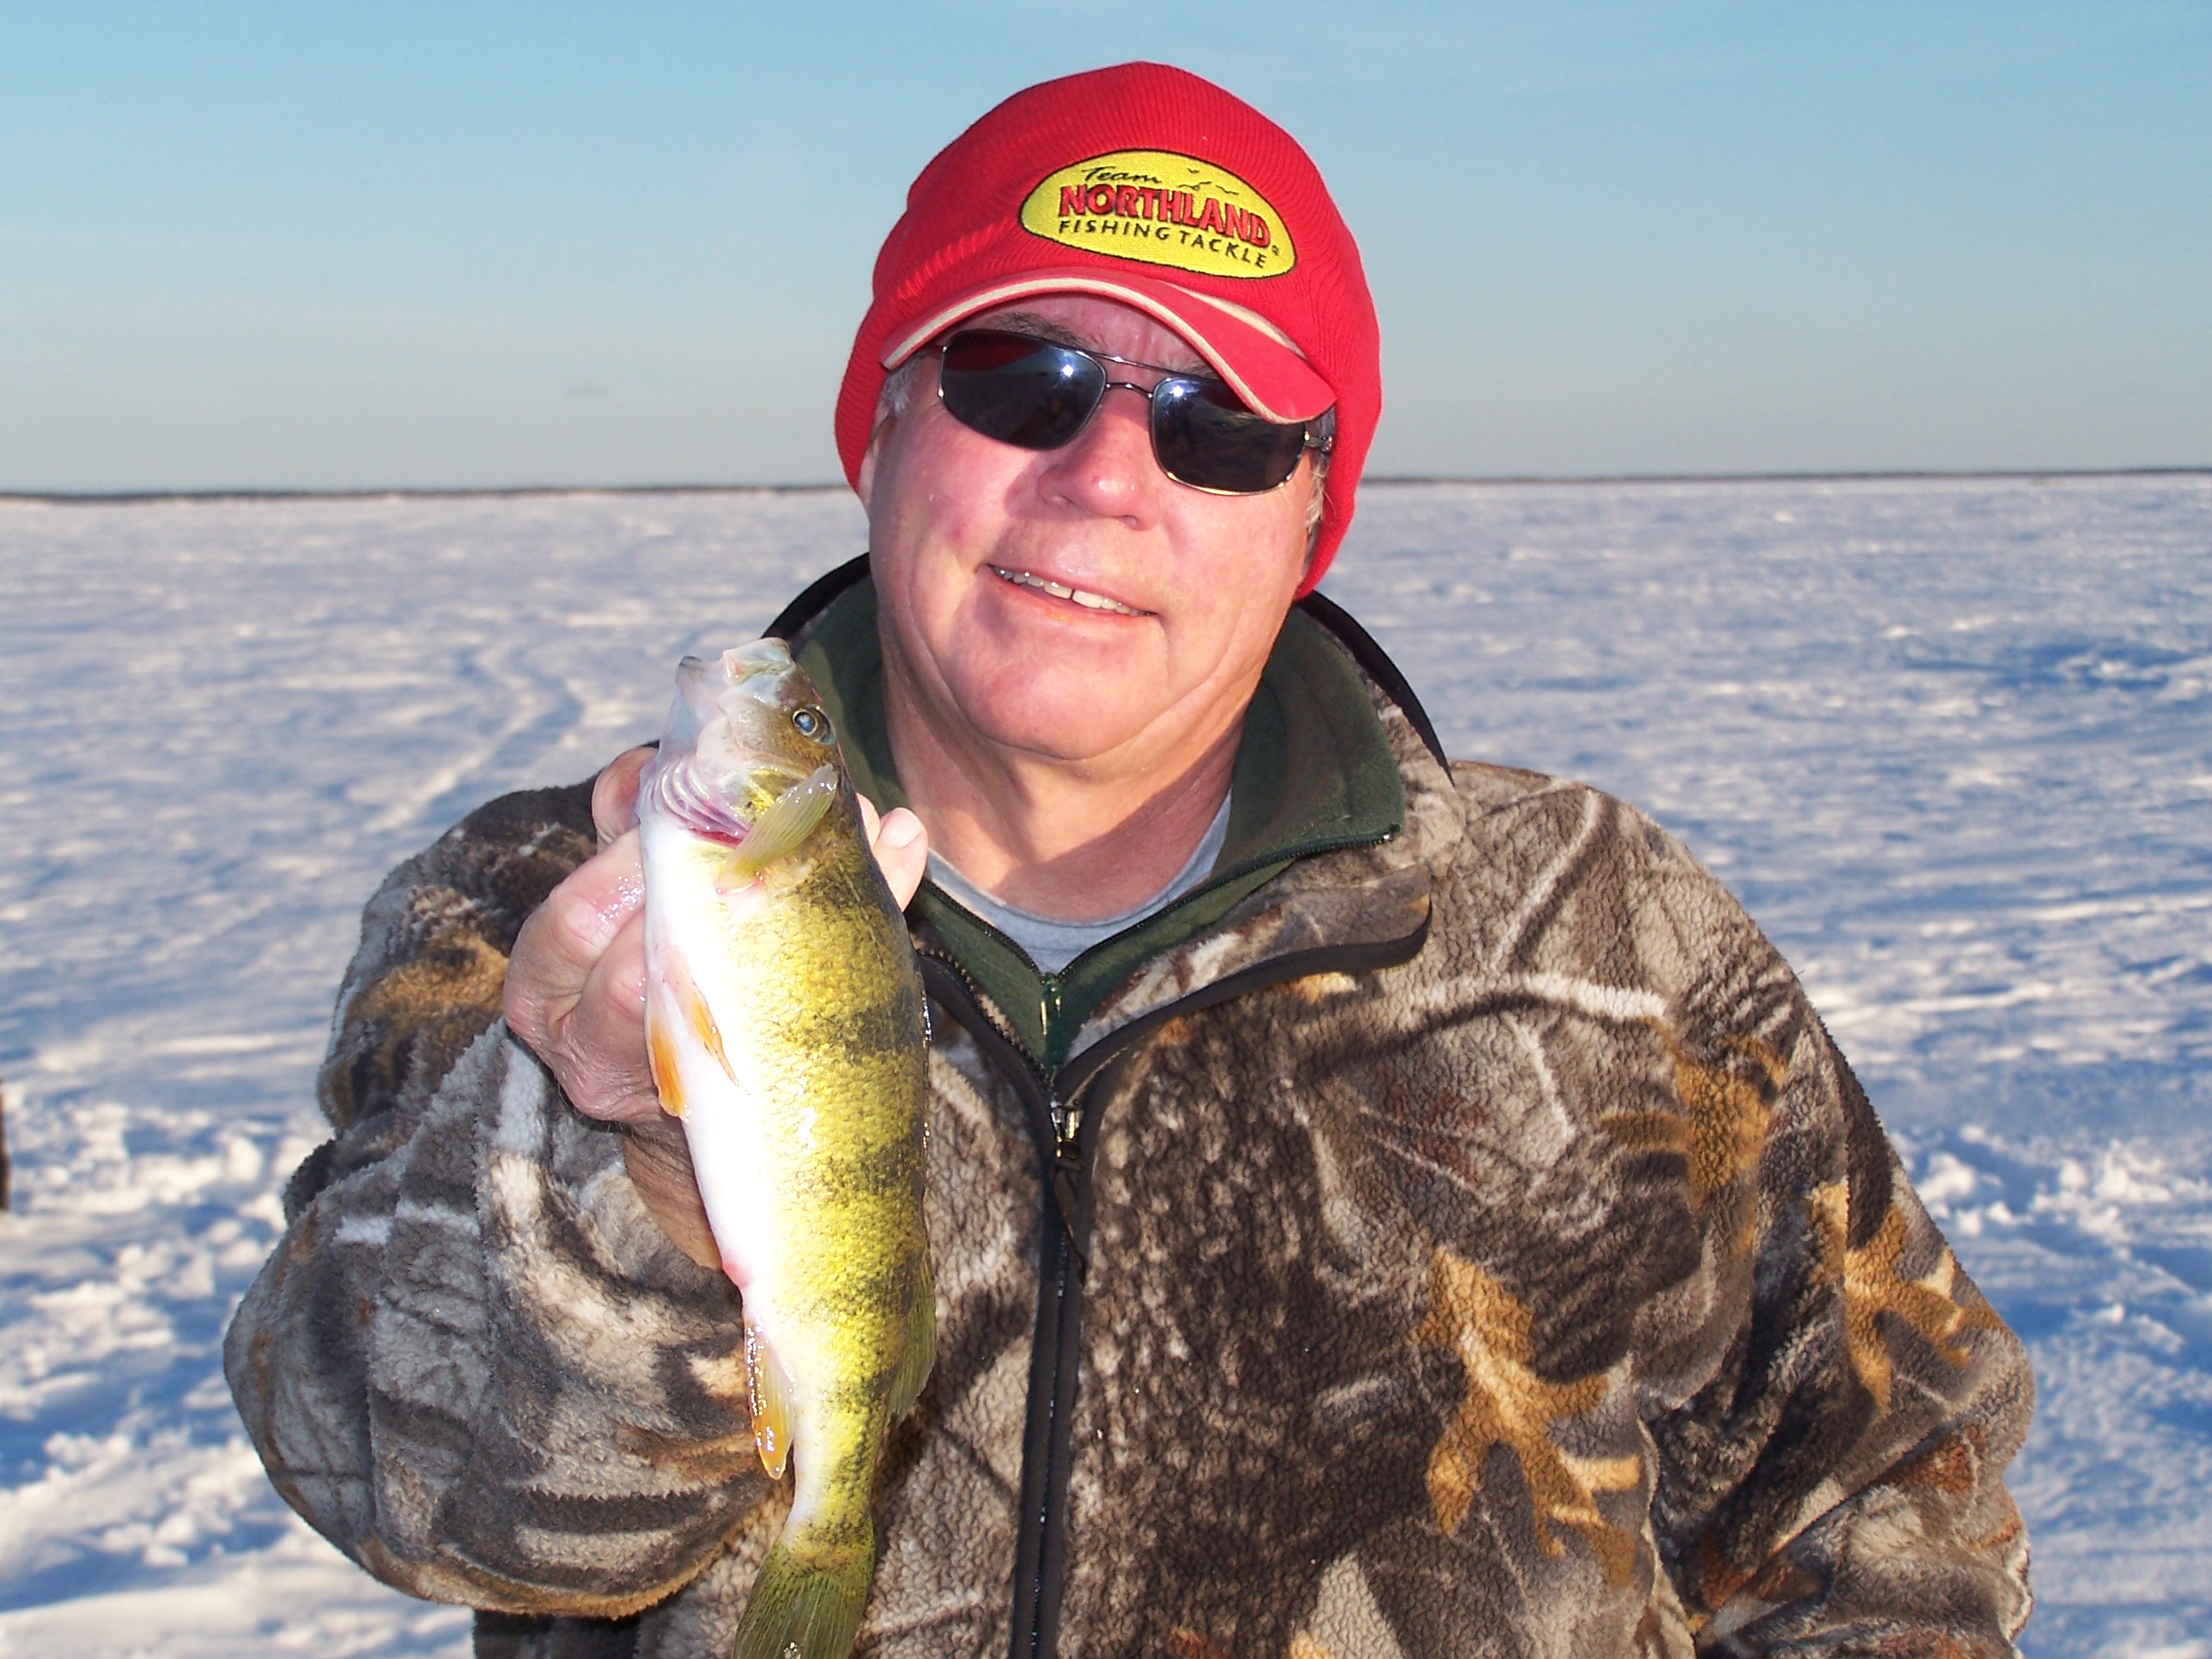 Duane Peterson with a perch caught ice fishing